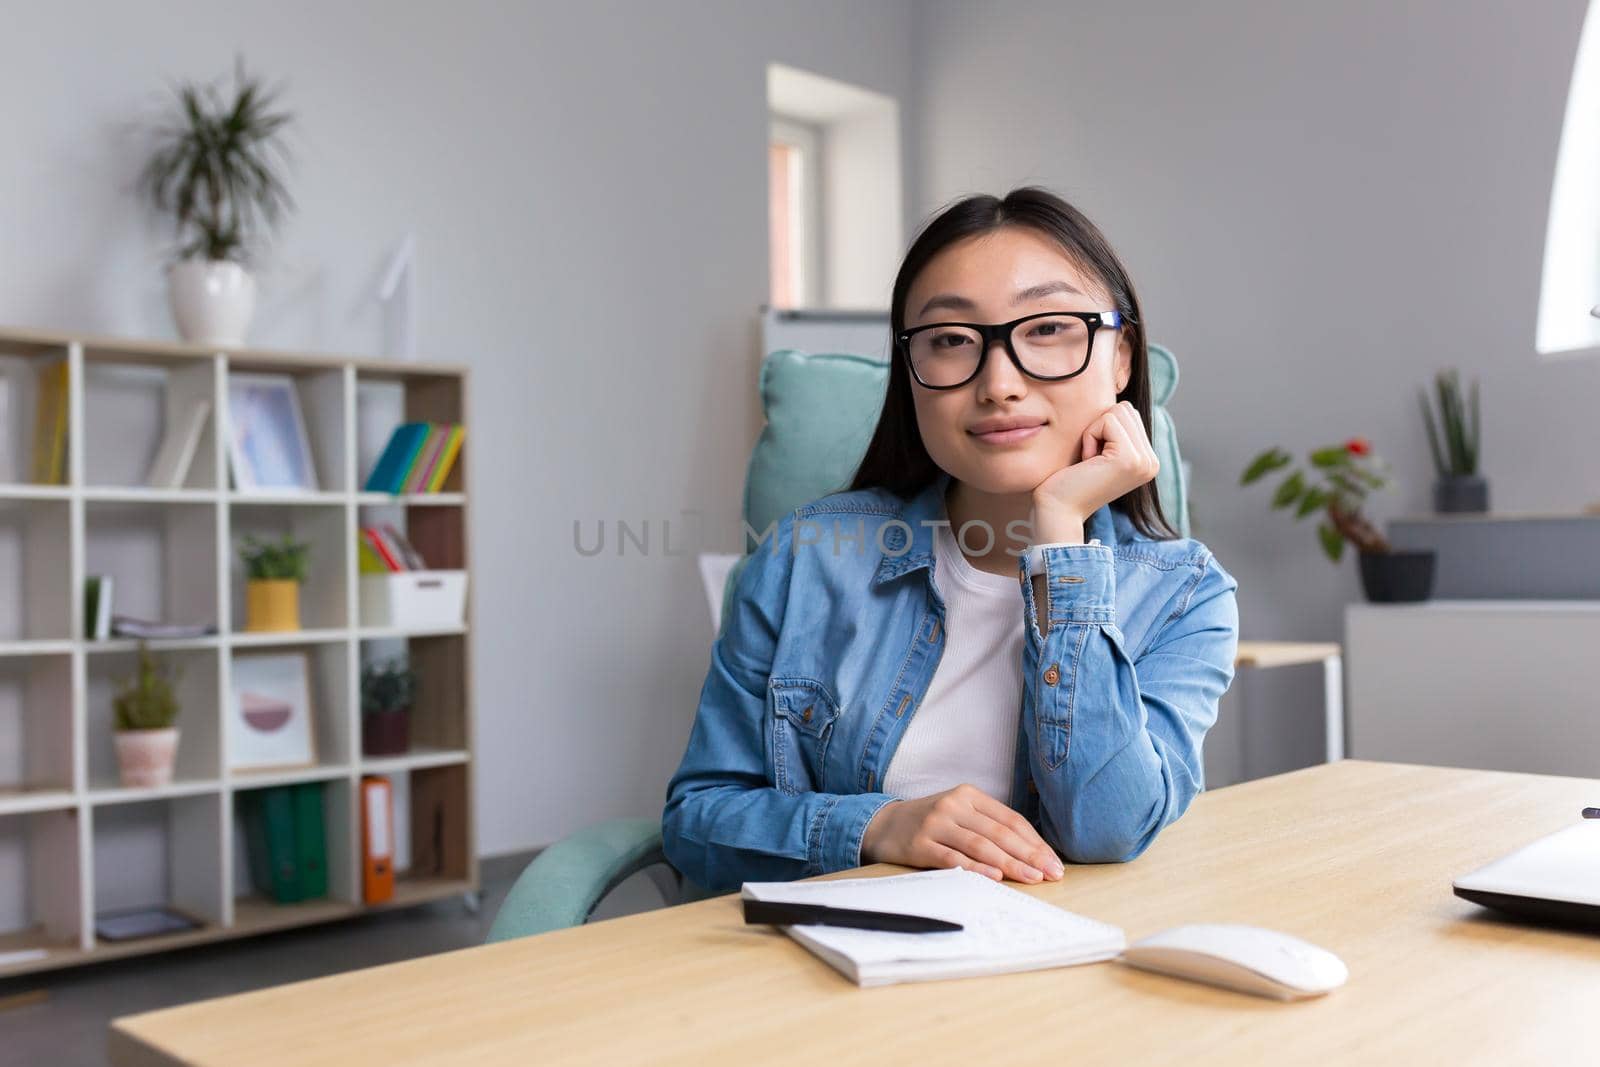 Portrait of young business woman in modern office, Asian looking at camera smiling.